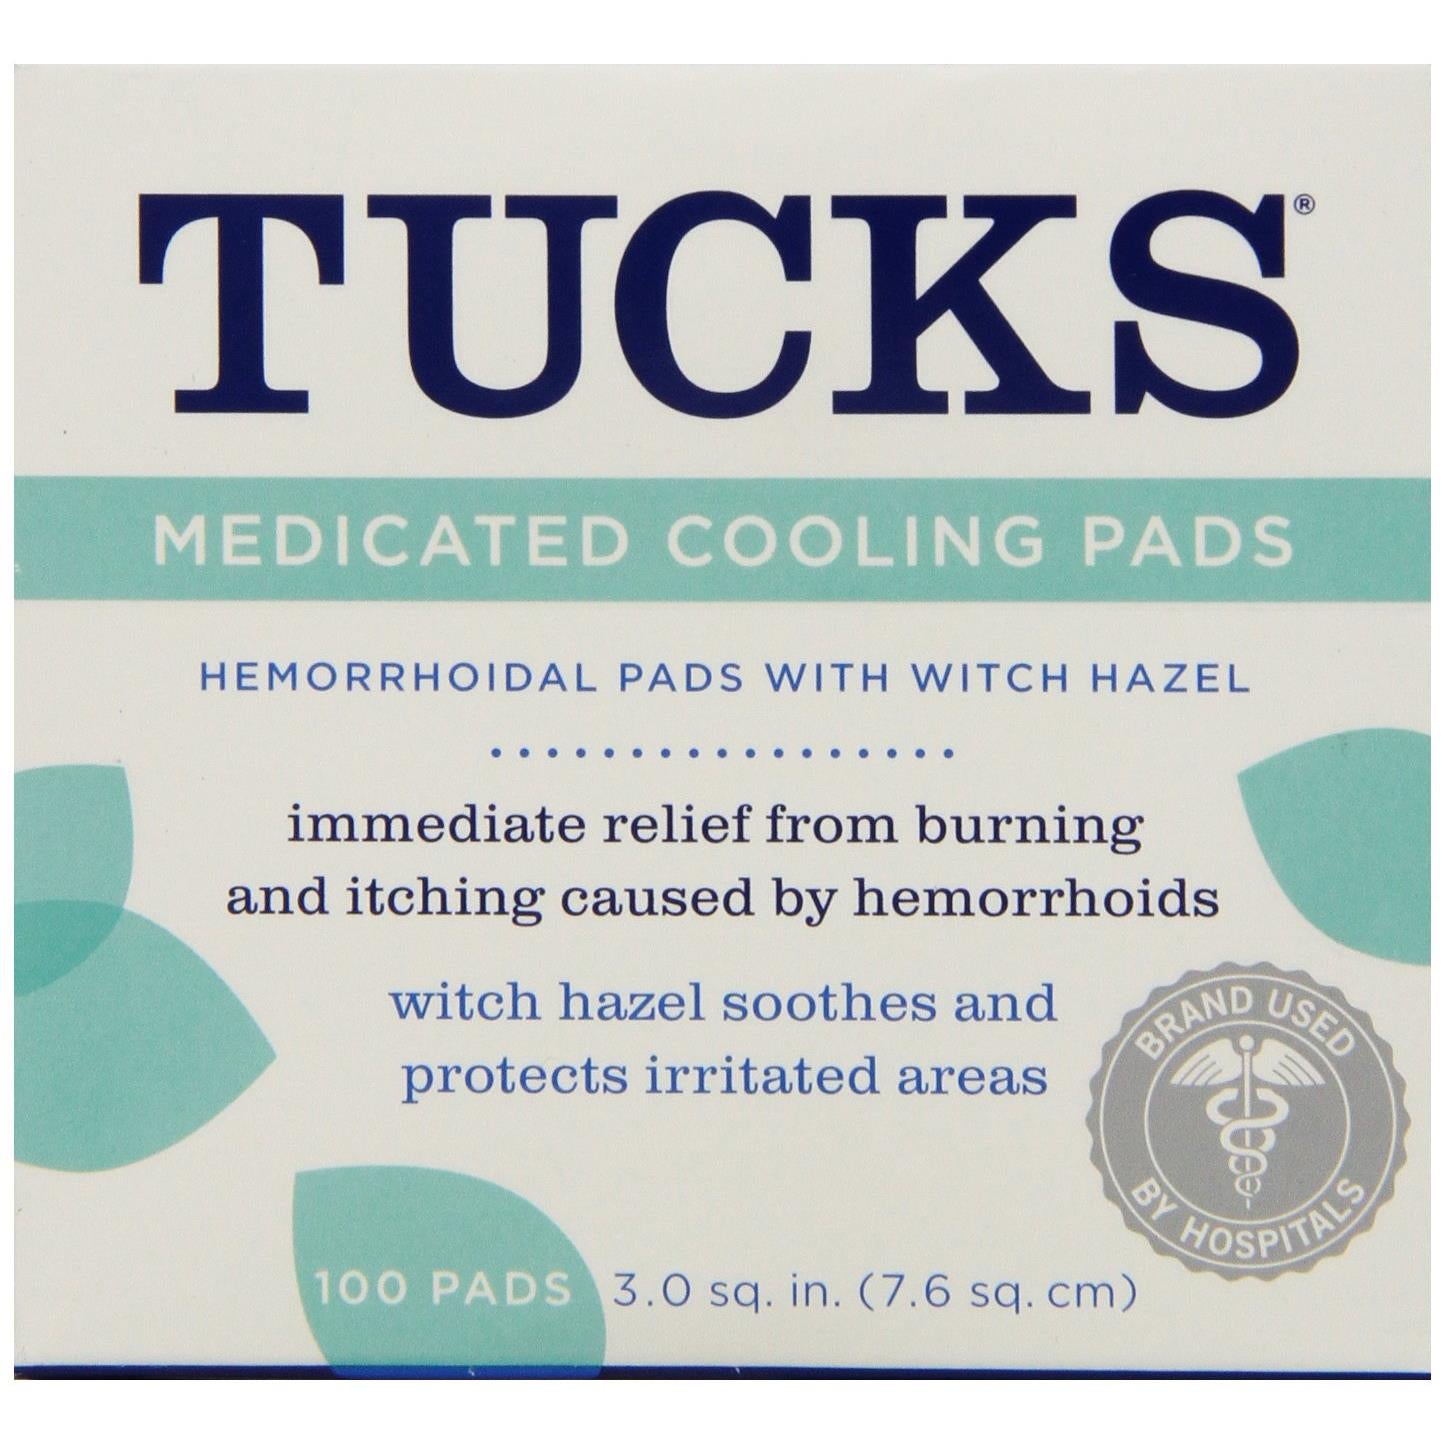 Tucks Medicated Witch Hazel Hemorrhoidal Pads, 100 Count